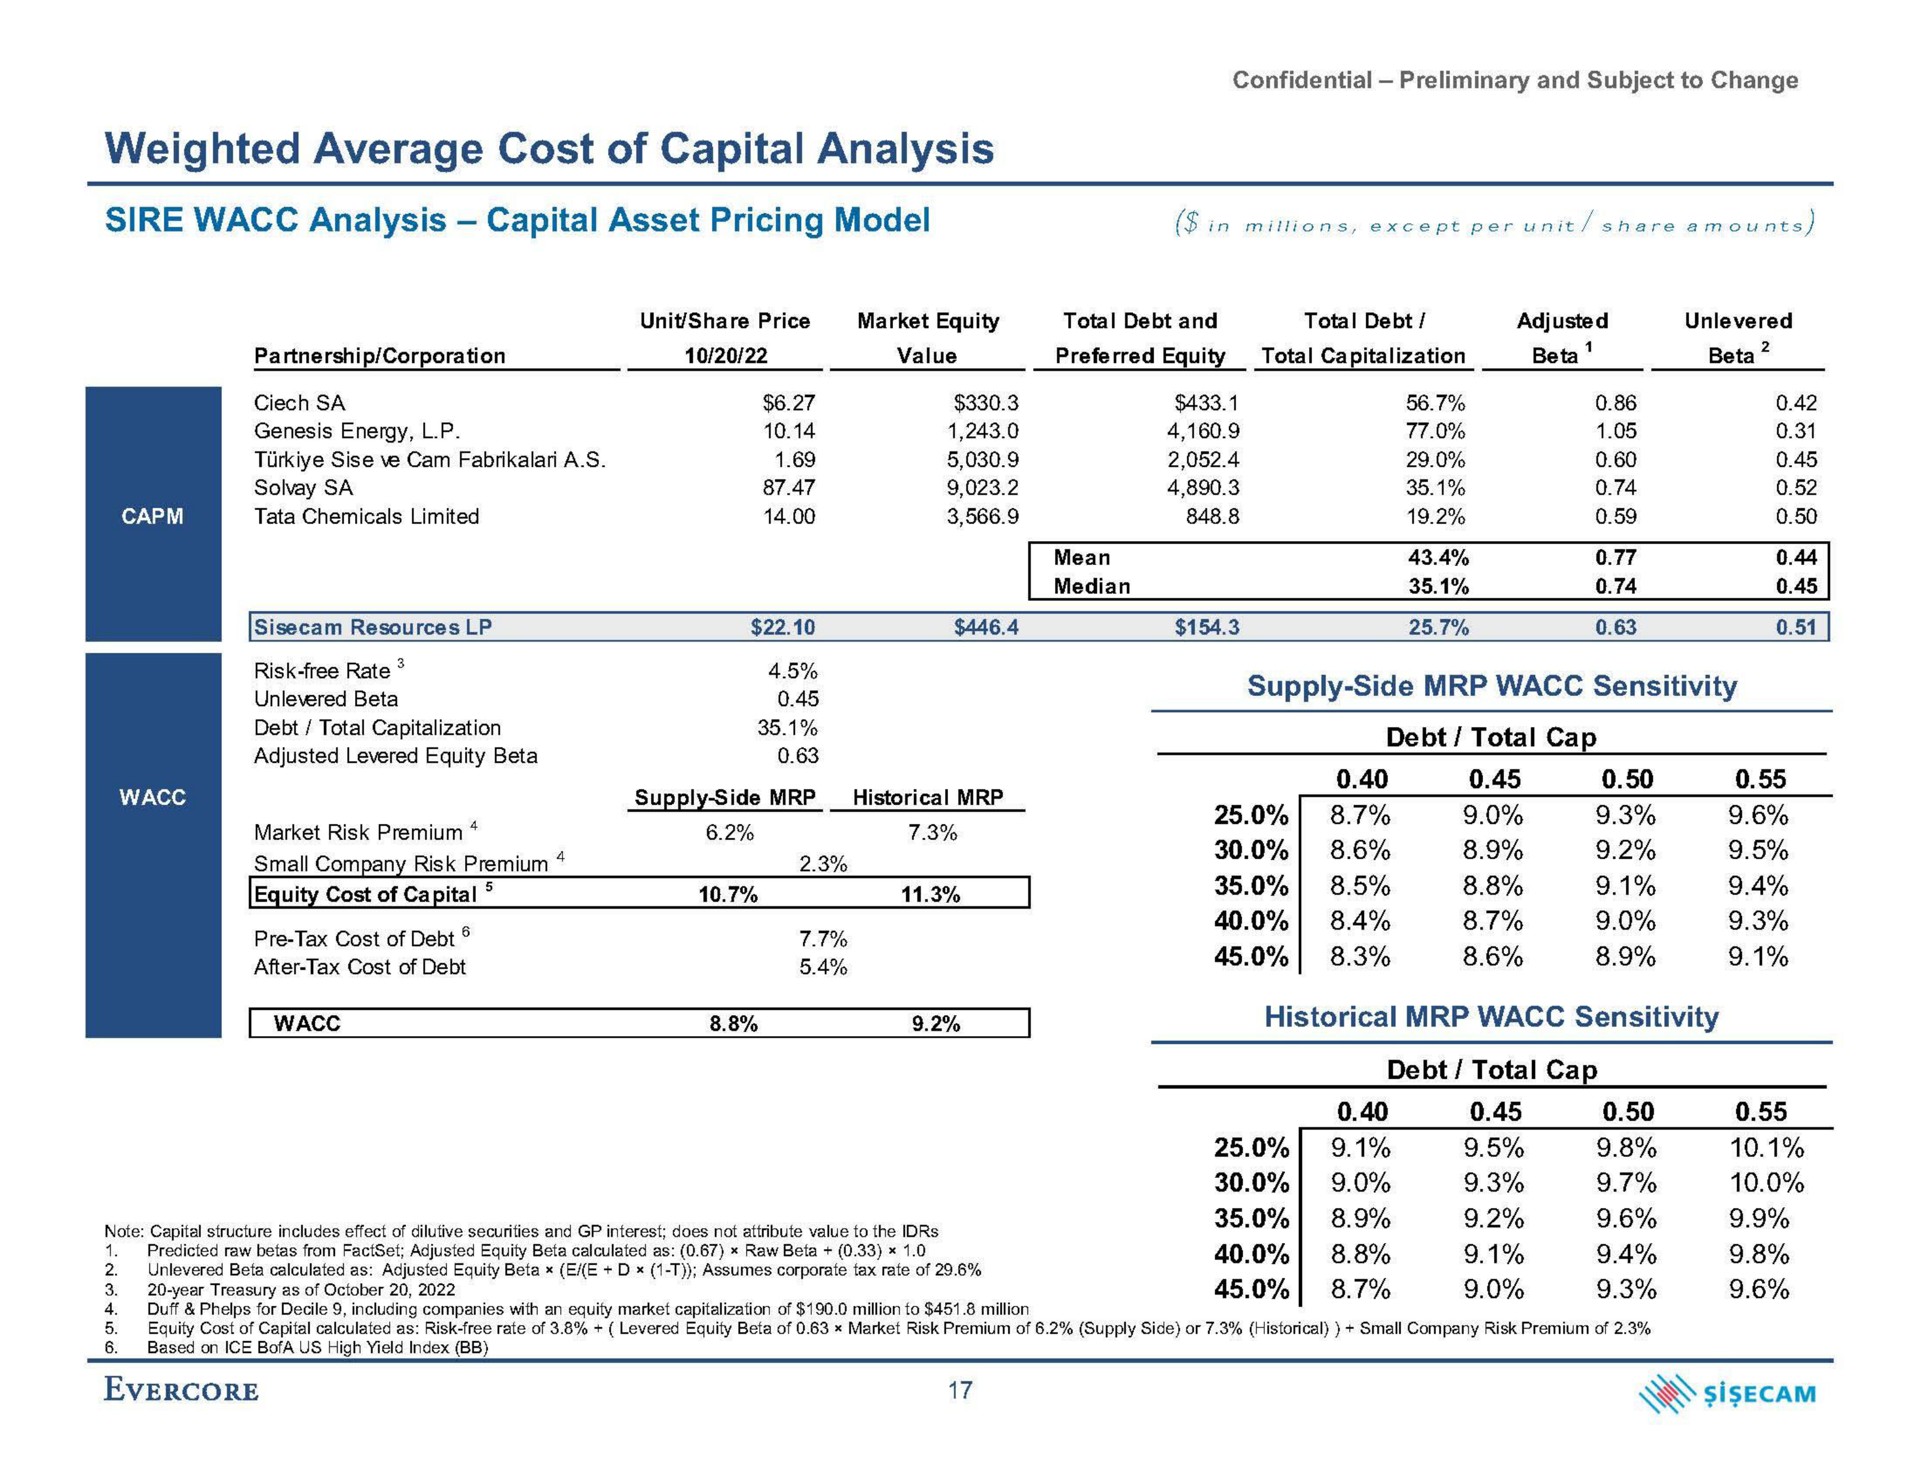 weighted average cost of capital analysis equity cost of capital after tax cost of debt | Evercore